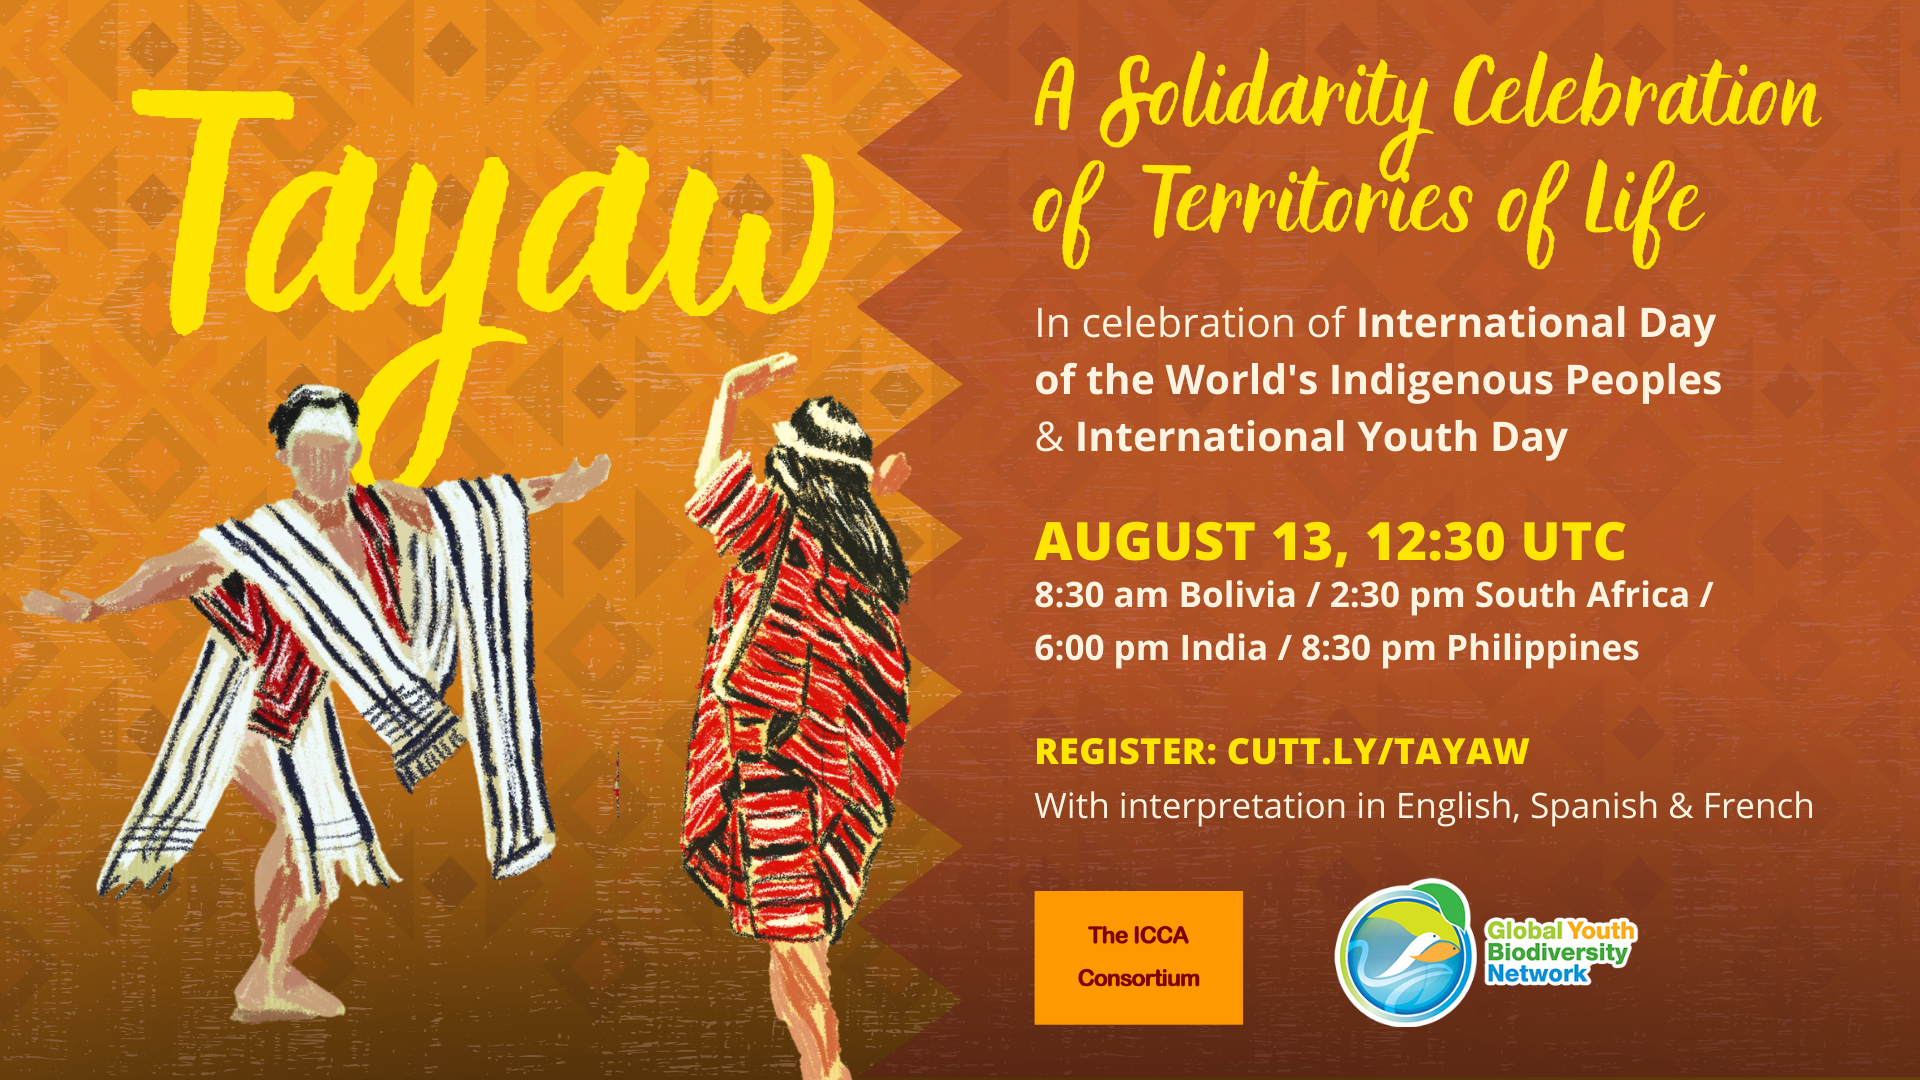 Inviting you to TAYAW: A solidarity celebration of territories of life